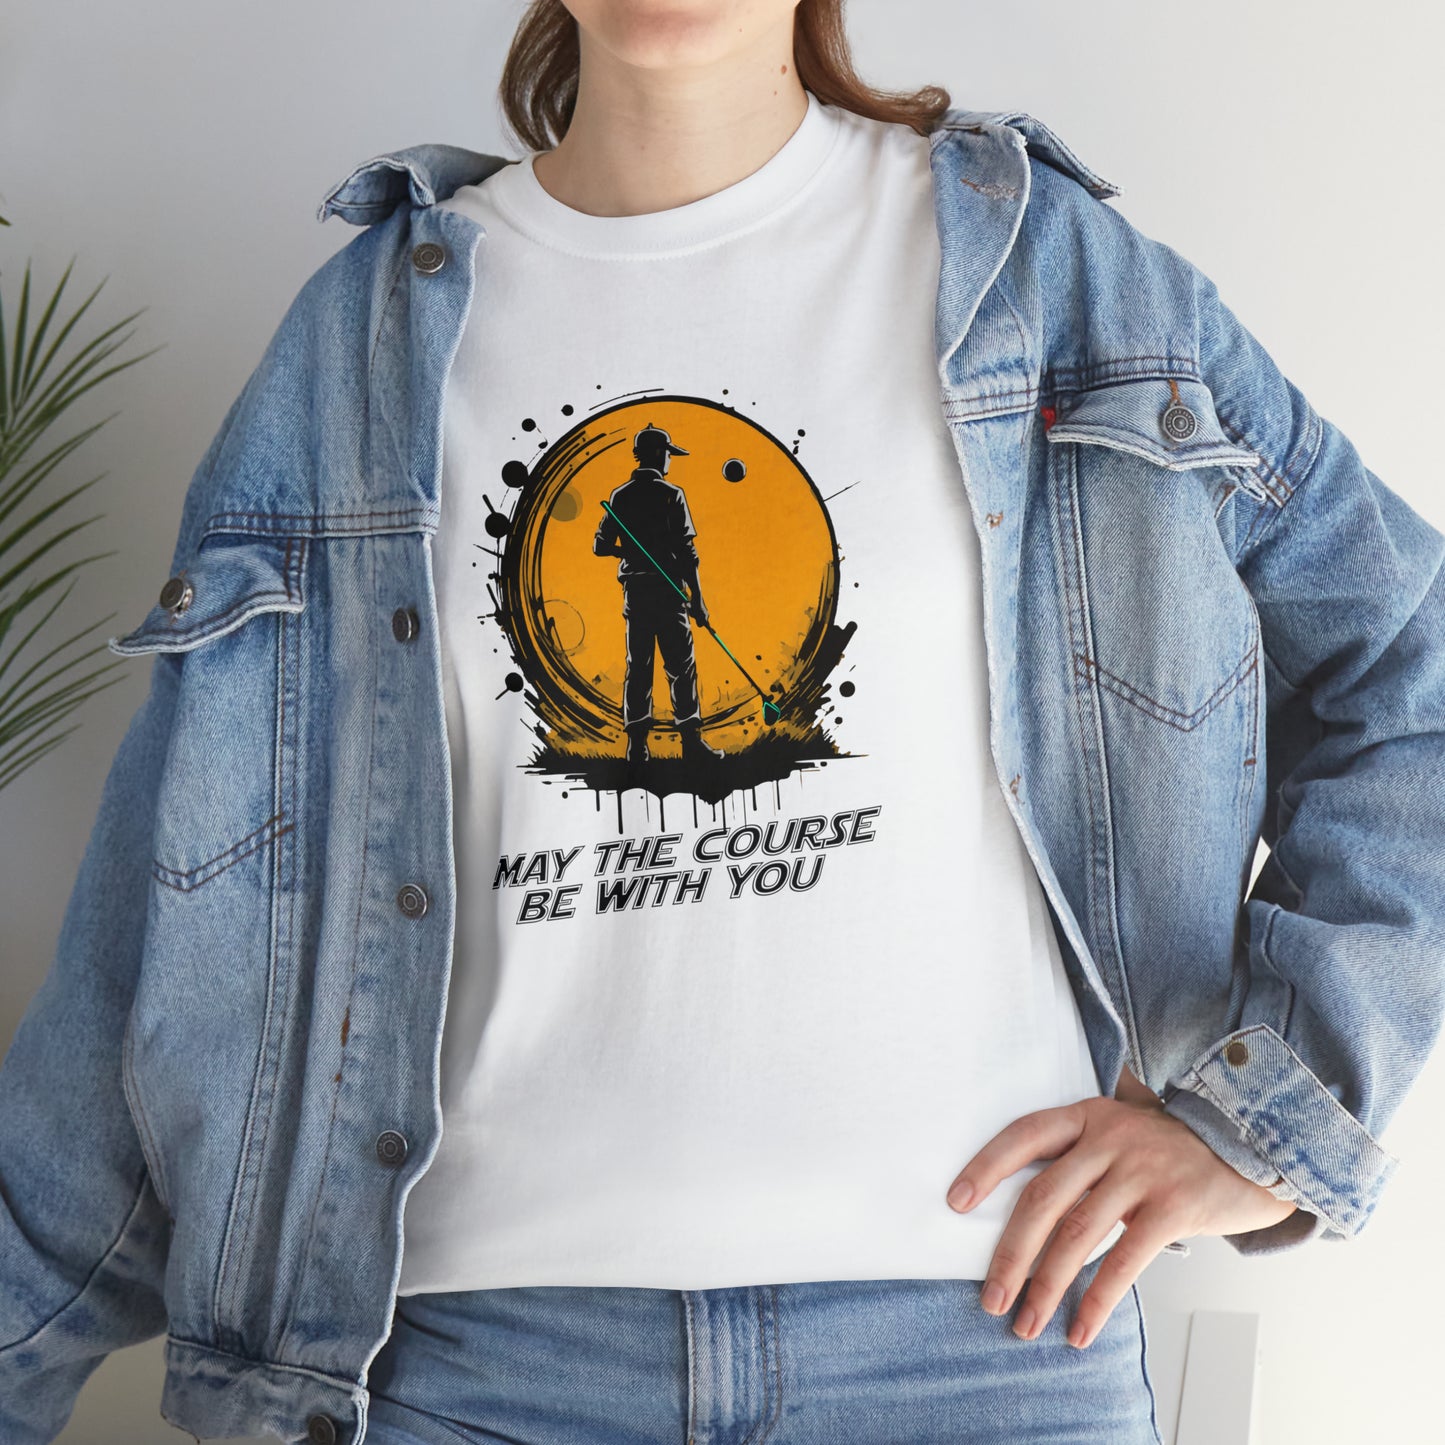 May the course be with you t-shirt